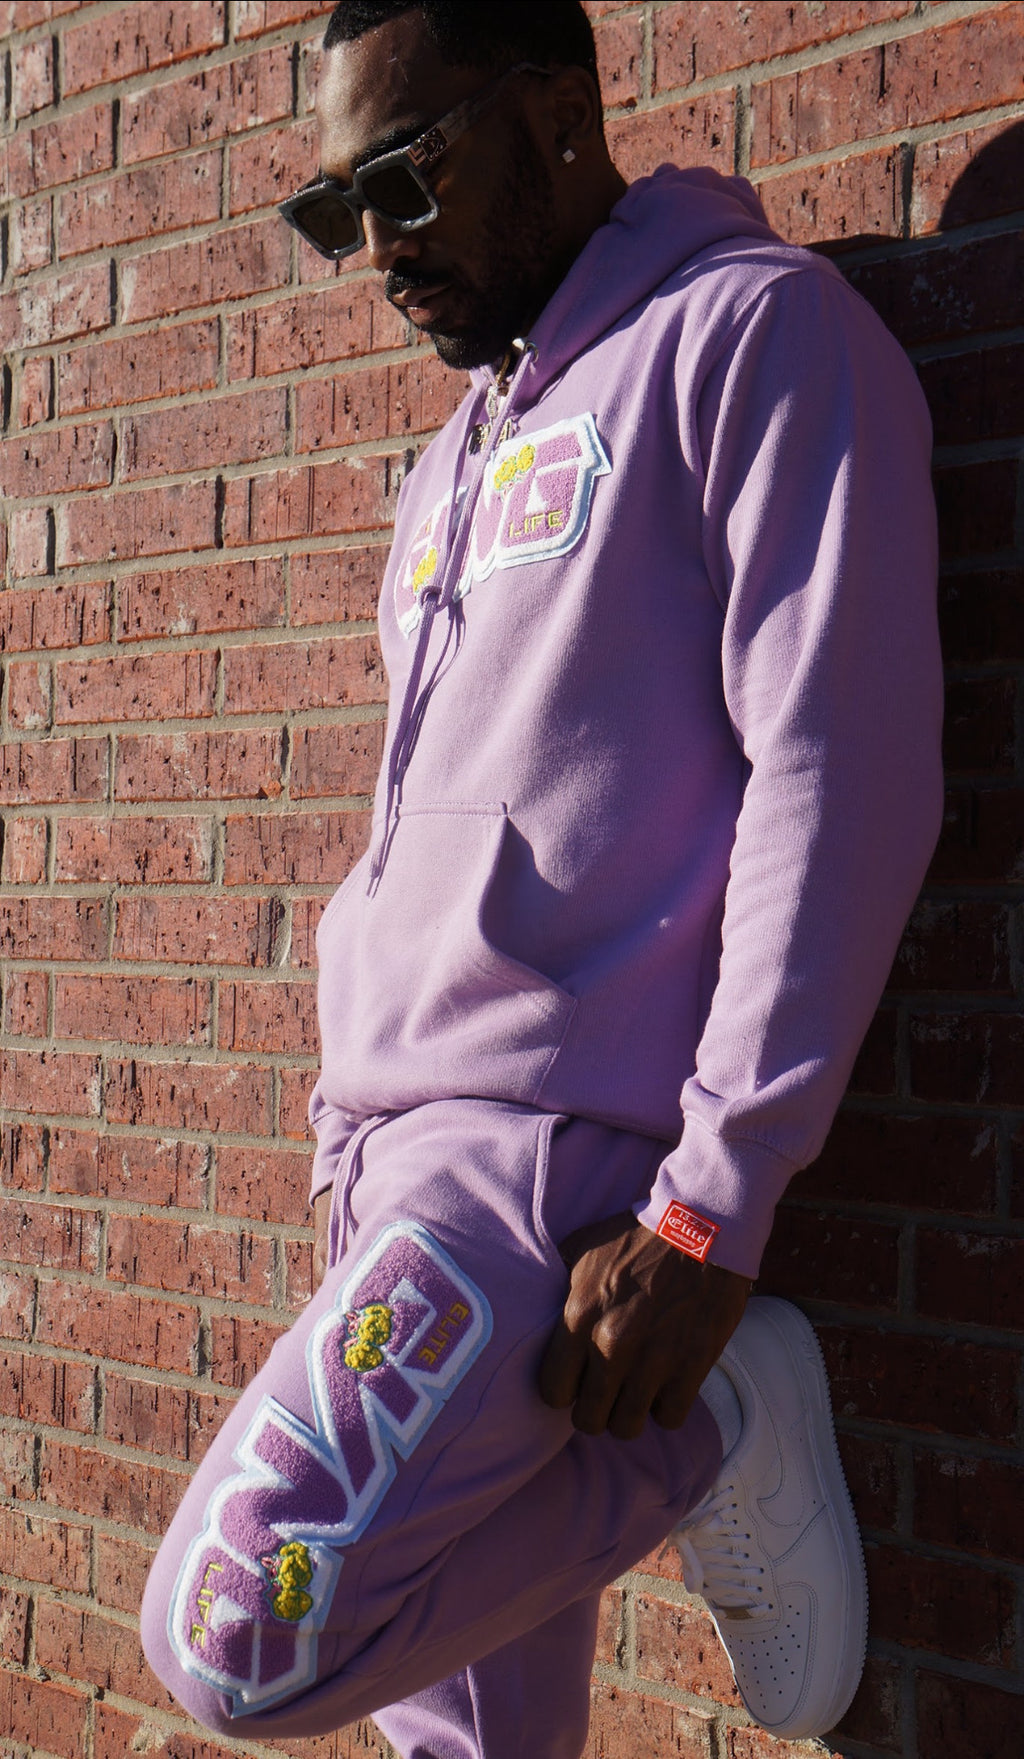 Lavender Gvng Embroidered Patch Sweatsuit